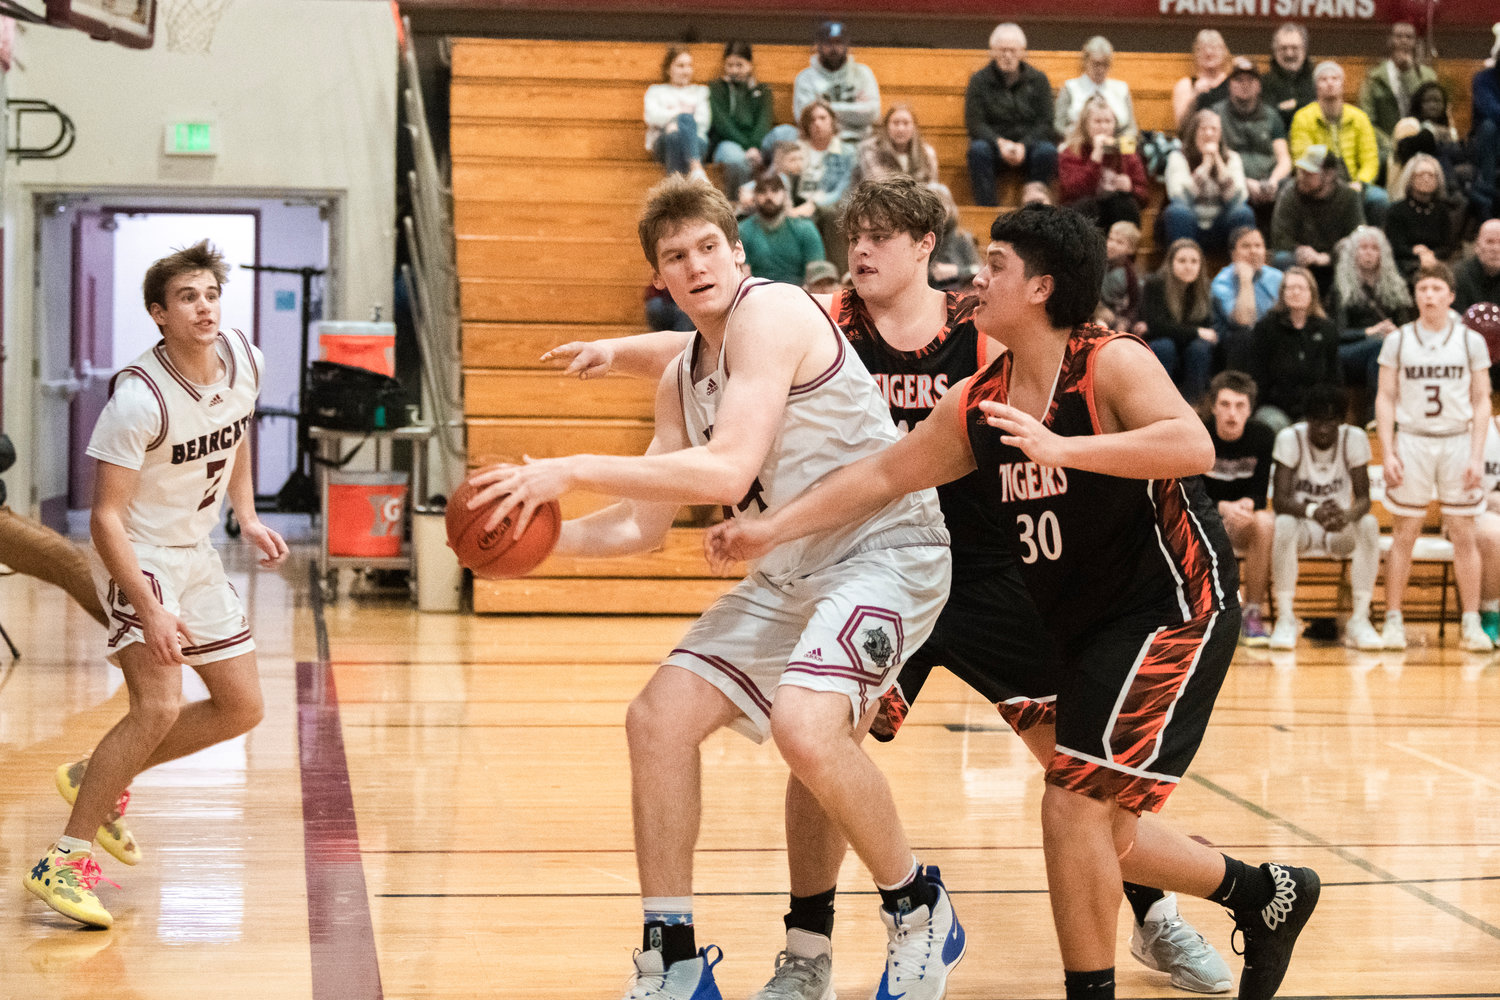 W.F. West senior Soren Dalan (44) looks to pass after snagging a rebound during a Tuesday night game in Chehalis.